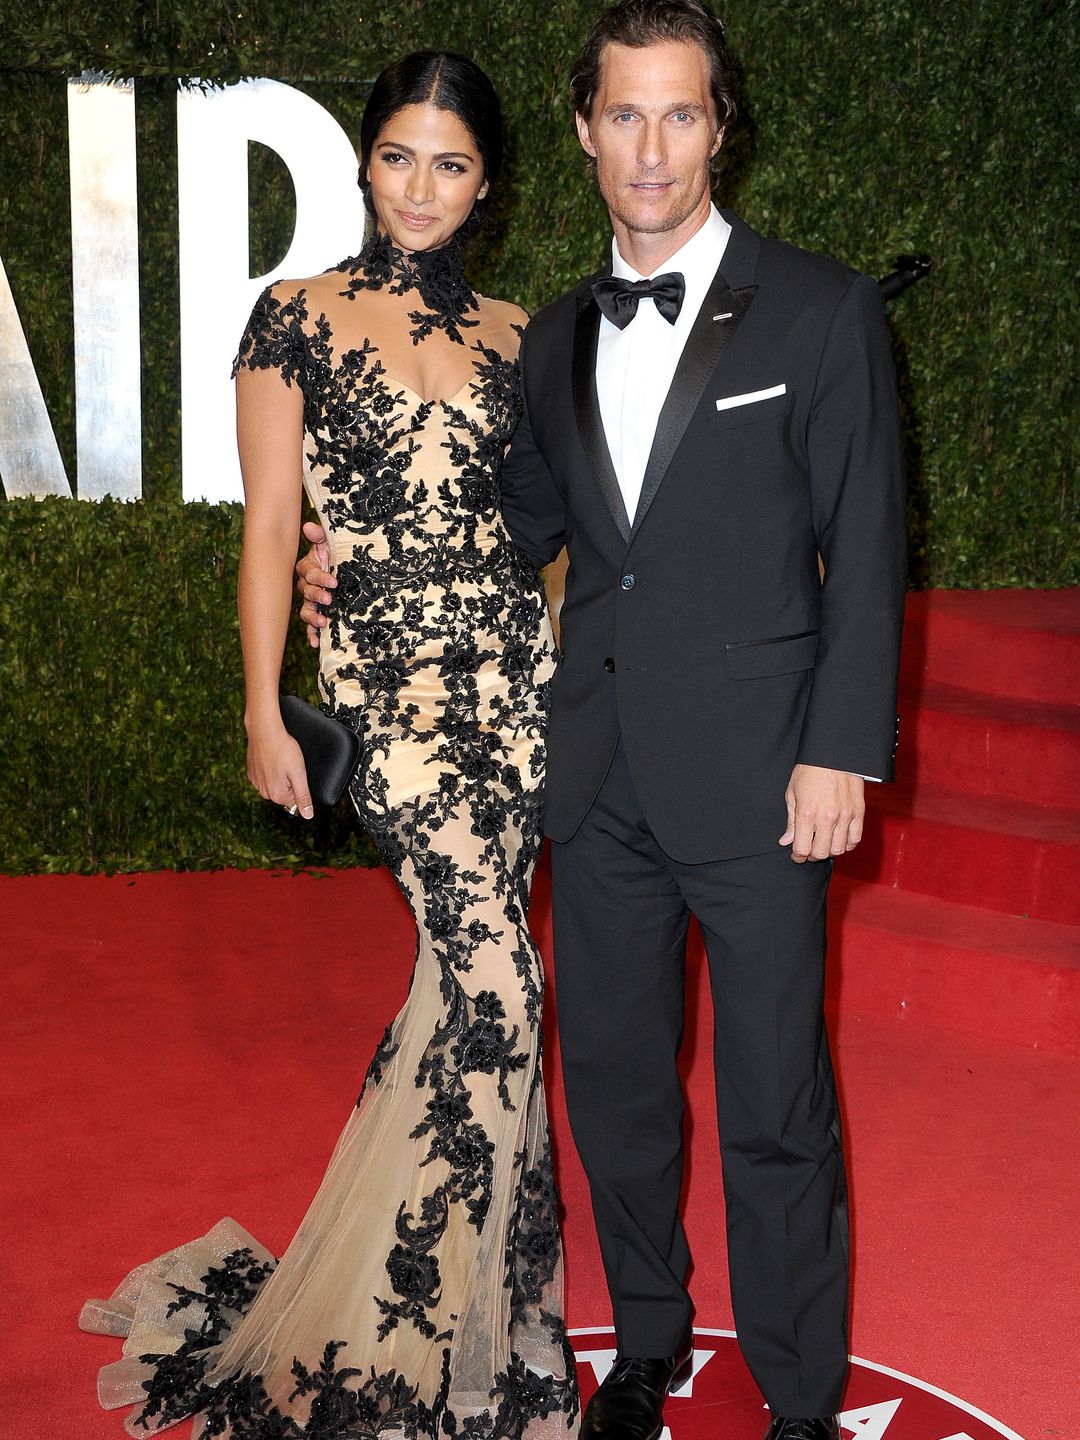 Camila Alves and Matthew McConaughey smiling for a photo on a red carpet